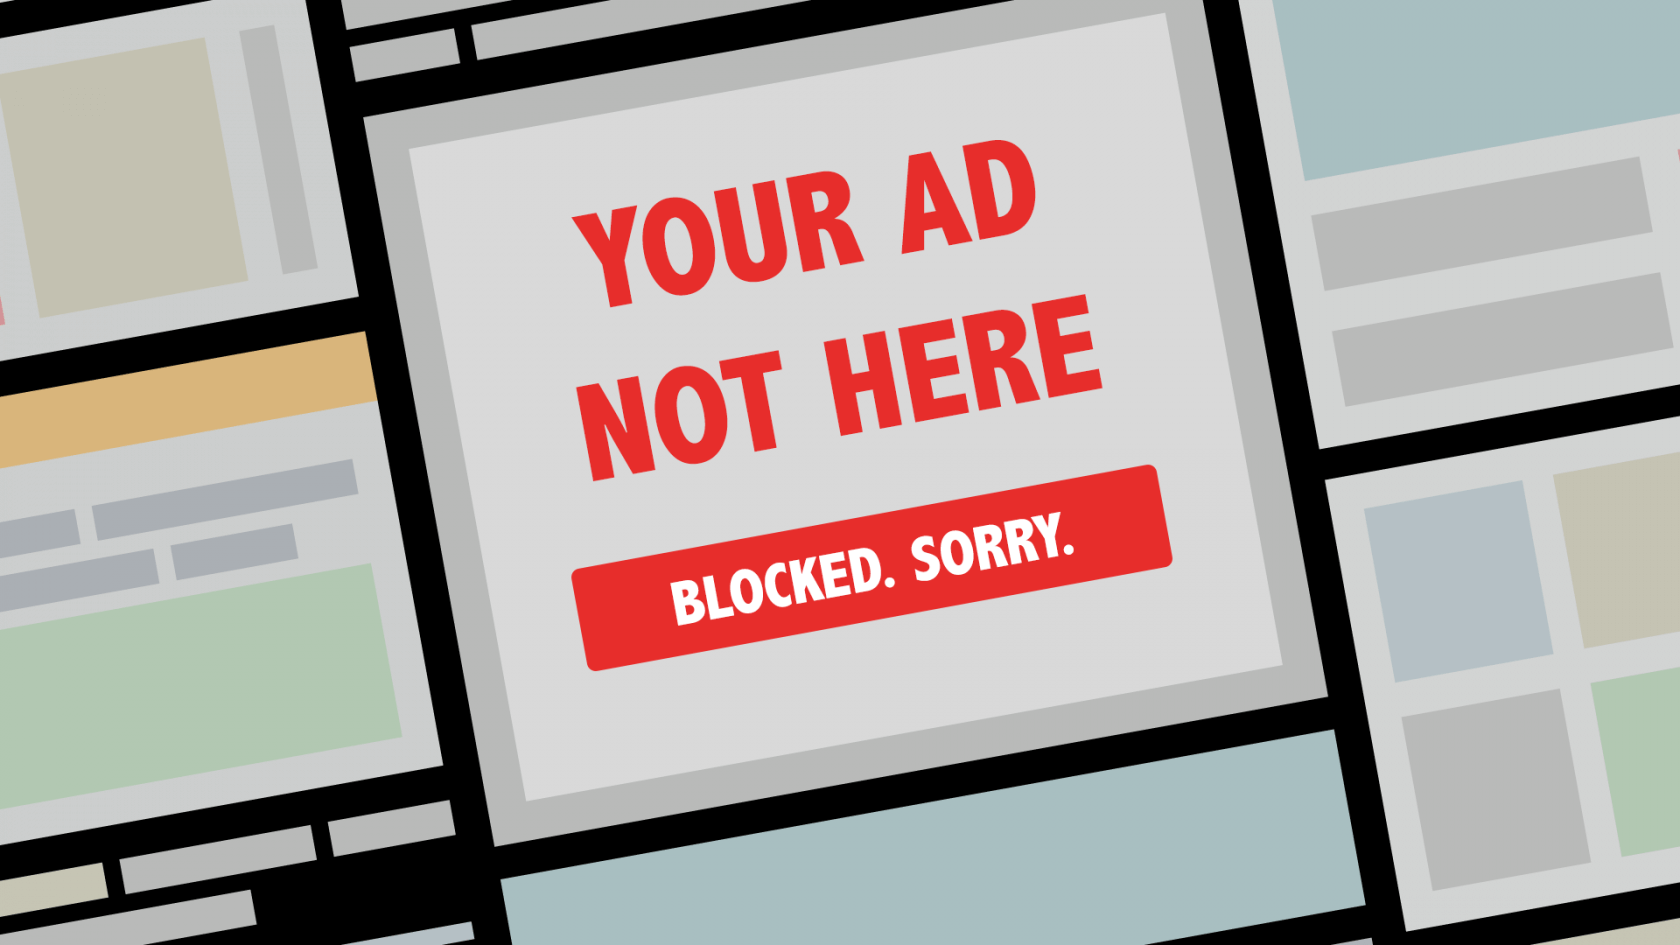 Brave rejects Google's anti ad-blocking proposal, boosts built-in ad-blocker performance by '69x'